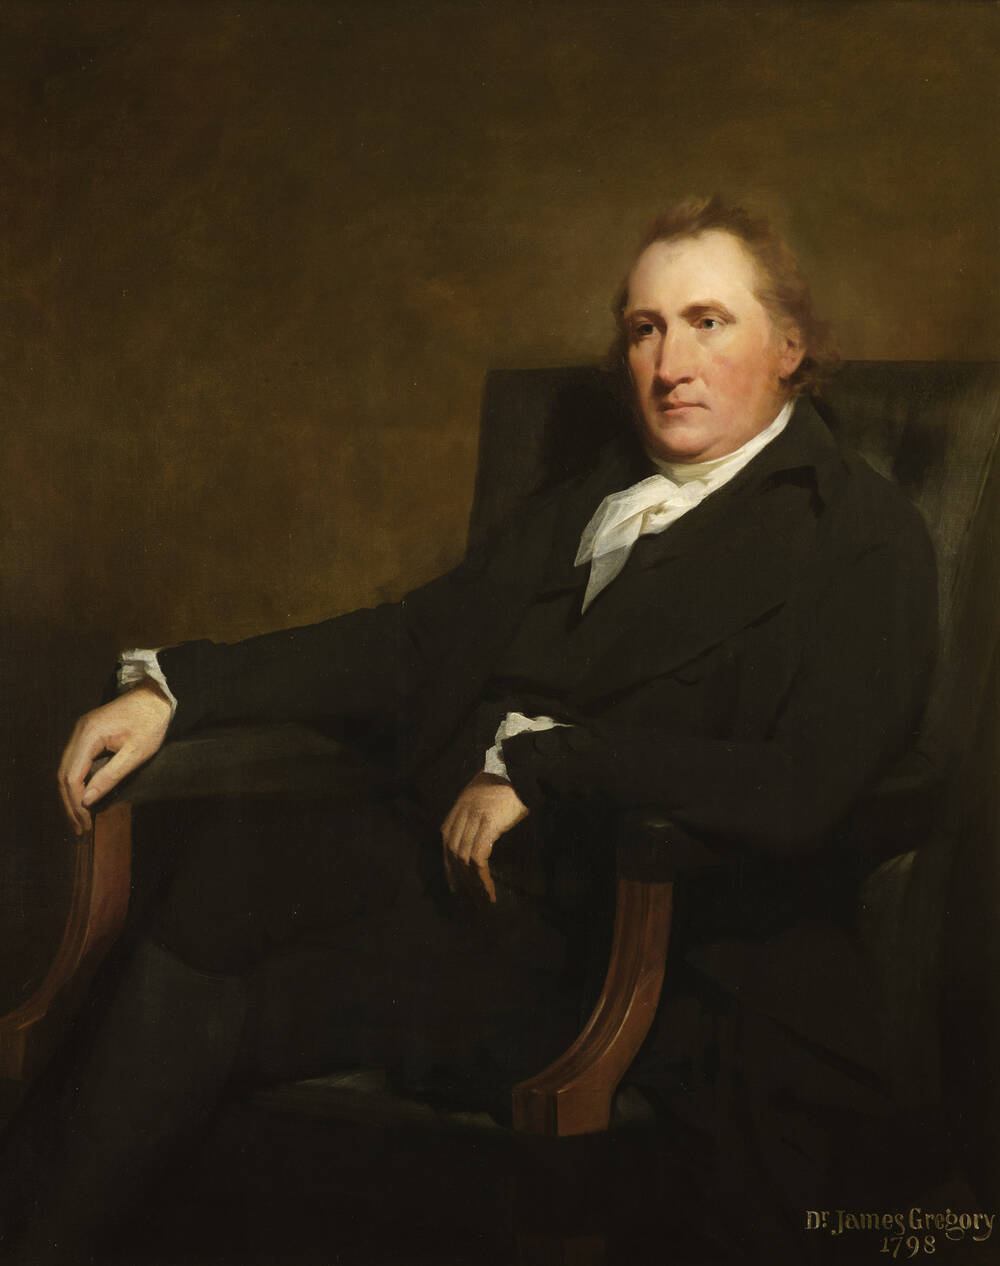  A portrait of Professor James Gregory, shown sitting in a high-backed black armchair. He wears a dark coat and waistcoat, with a white cravat.